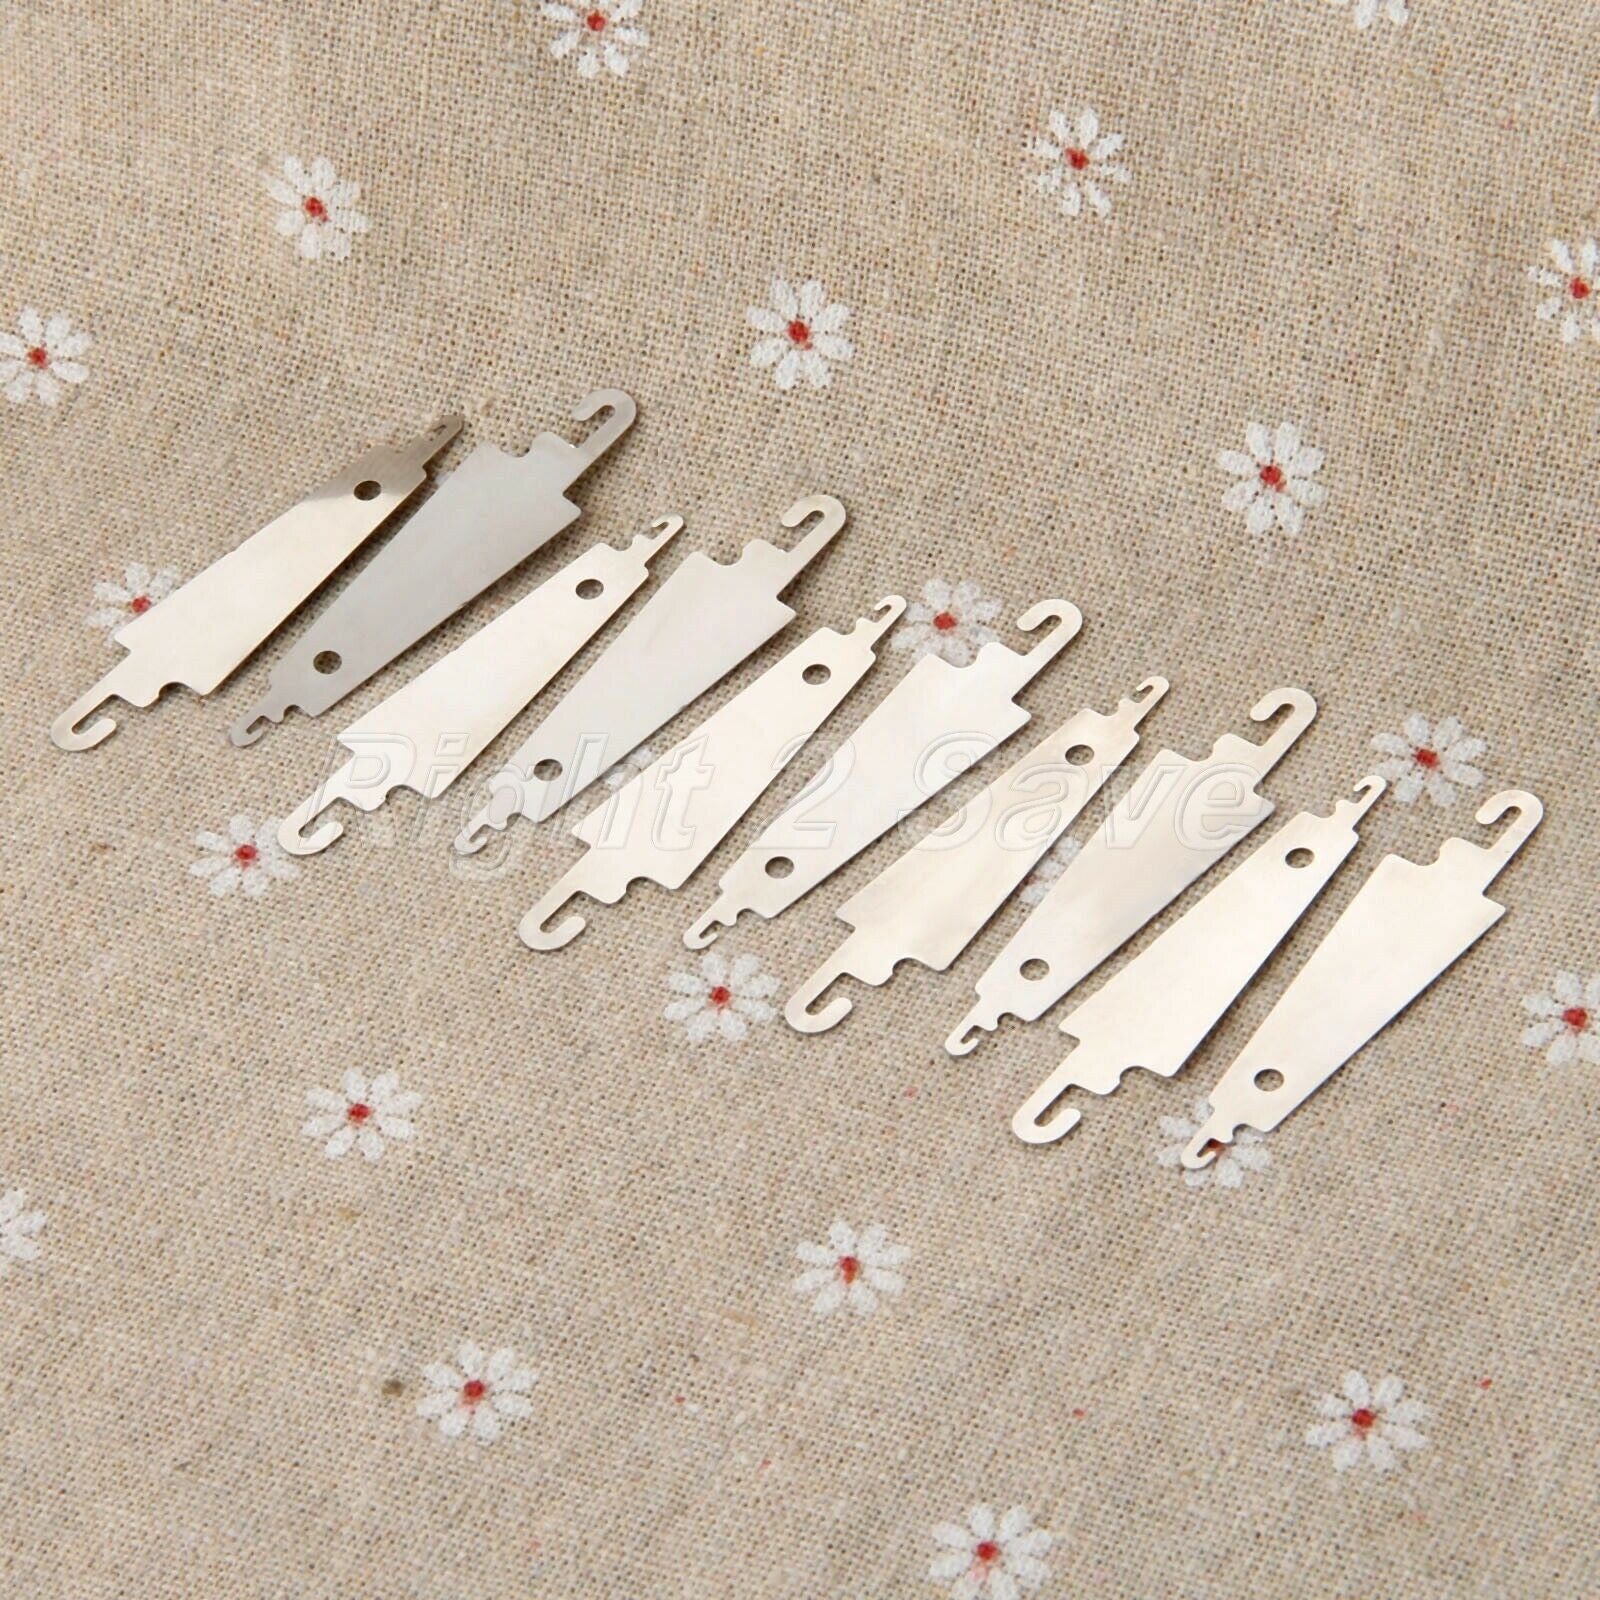 10pcs Stainless Steel Hook Needle Threader For Hand Sew Embroidery Cross Stitch